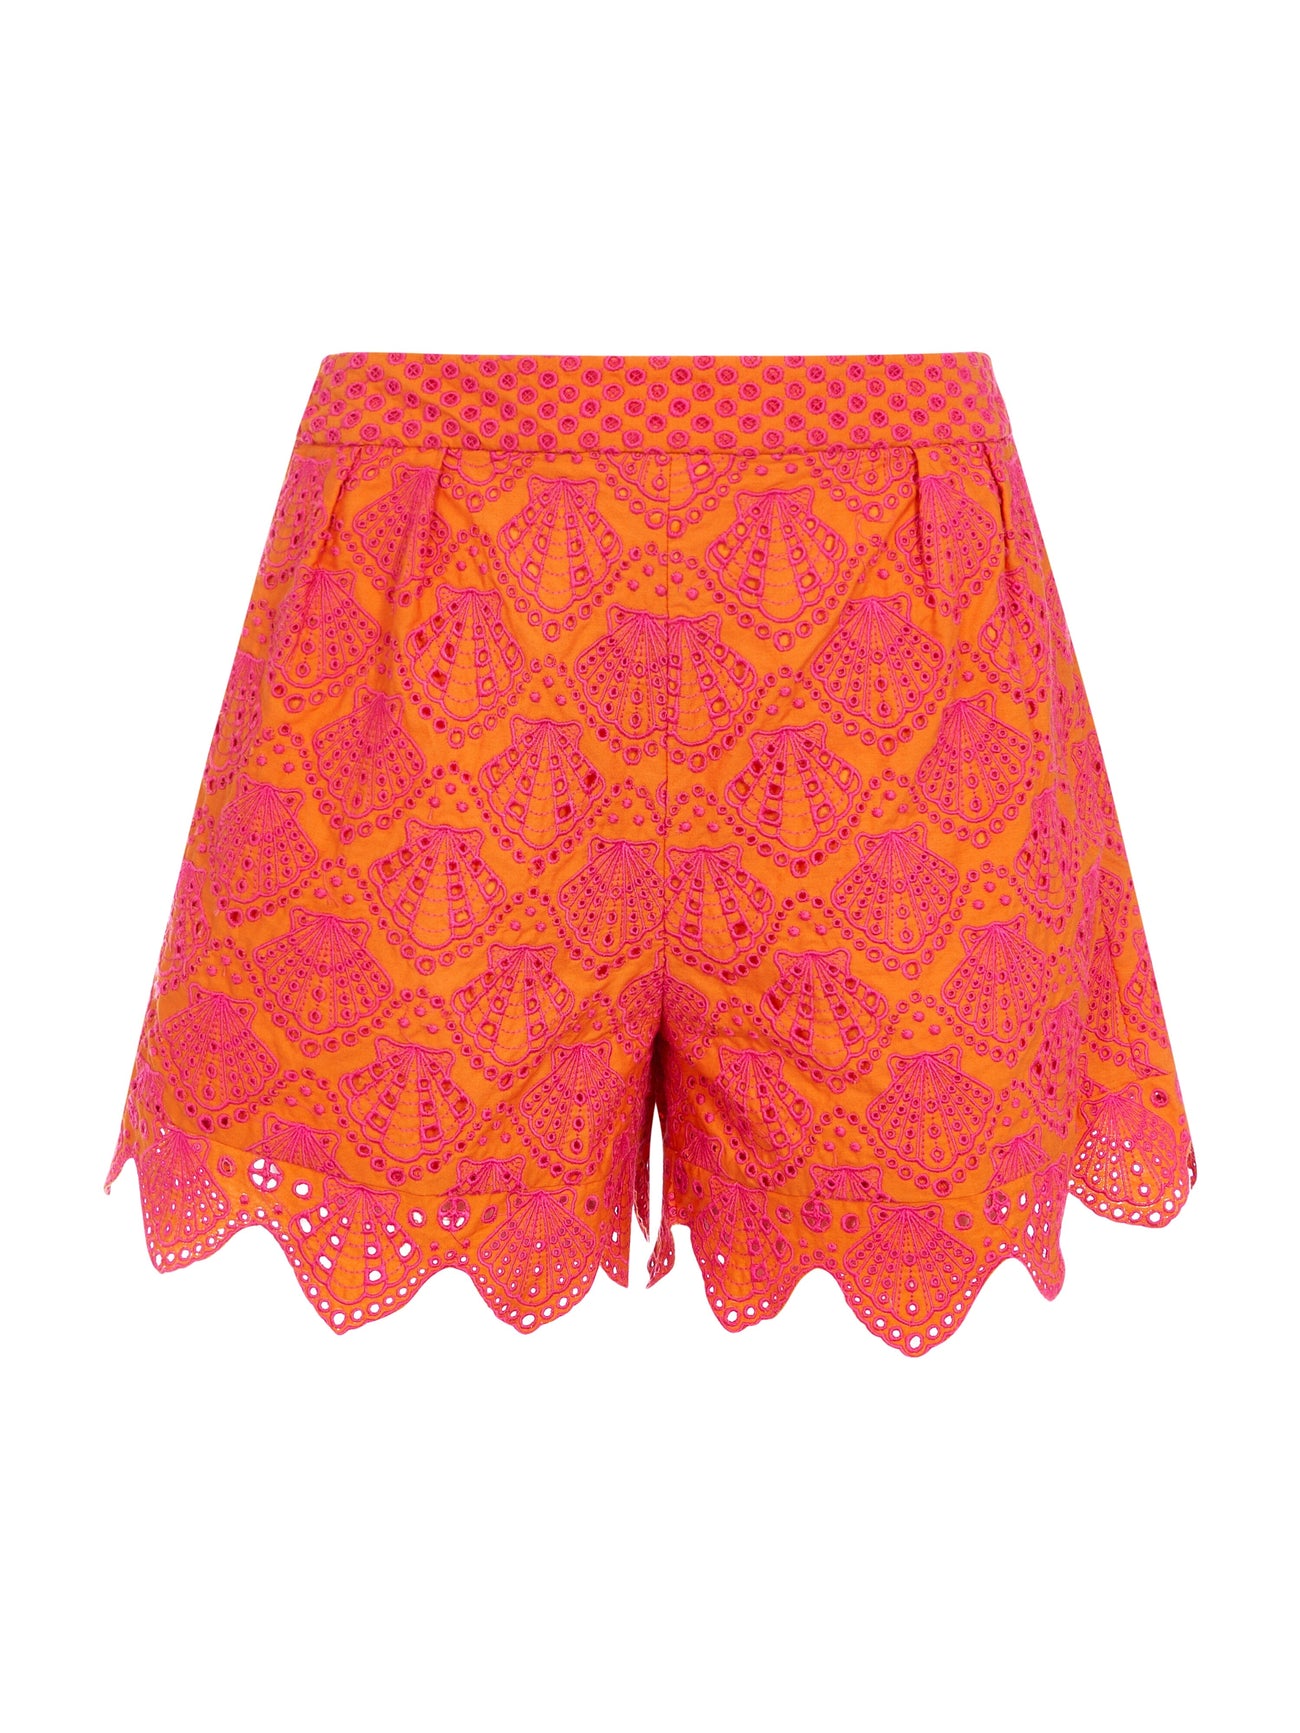 Load image into Gallery viewer, Paige Scallop Shorts in Orange Berry